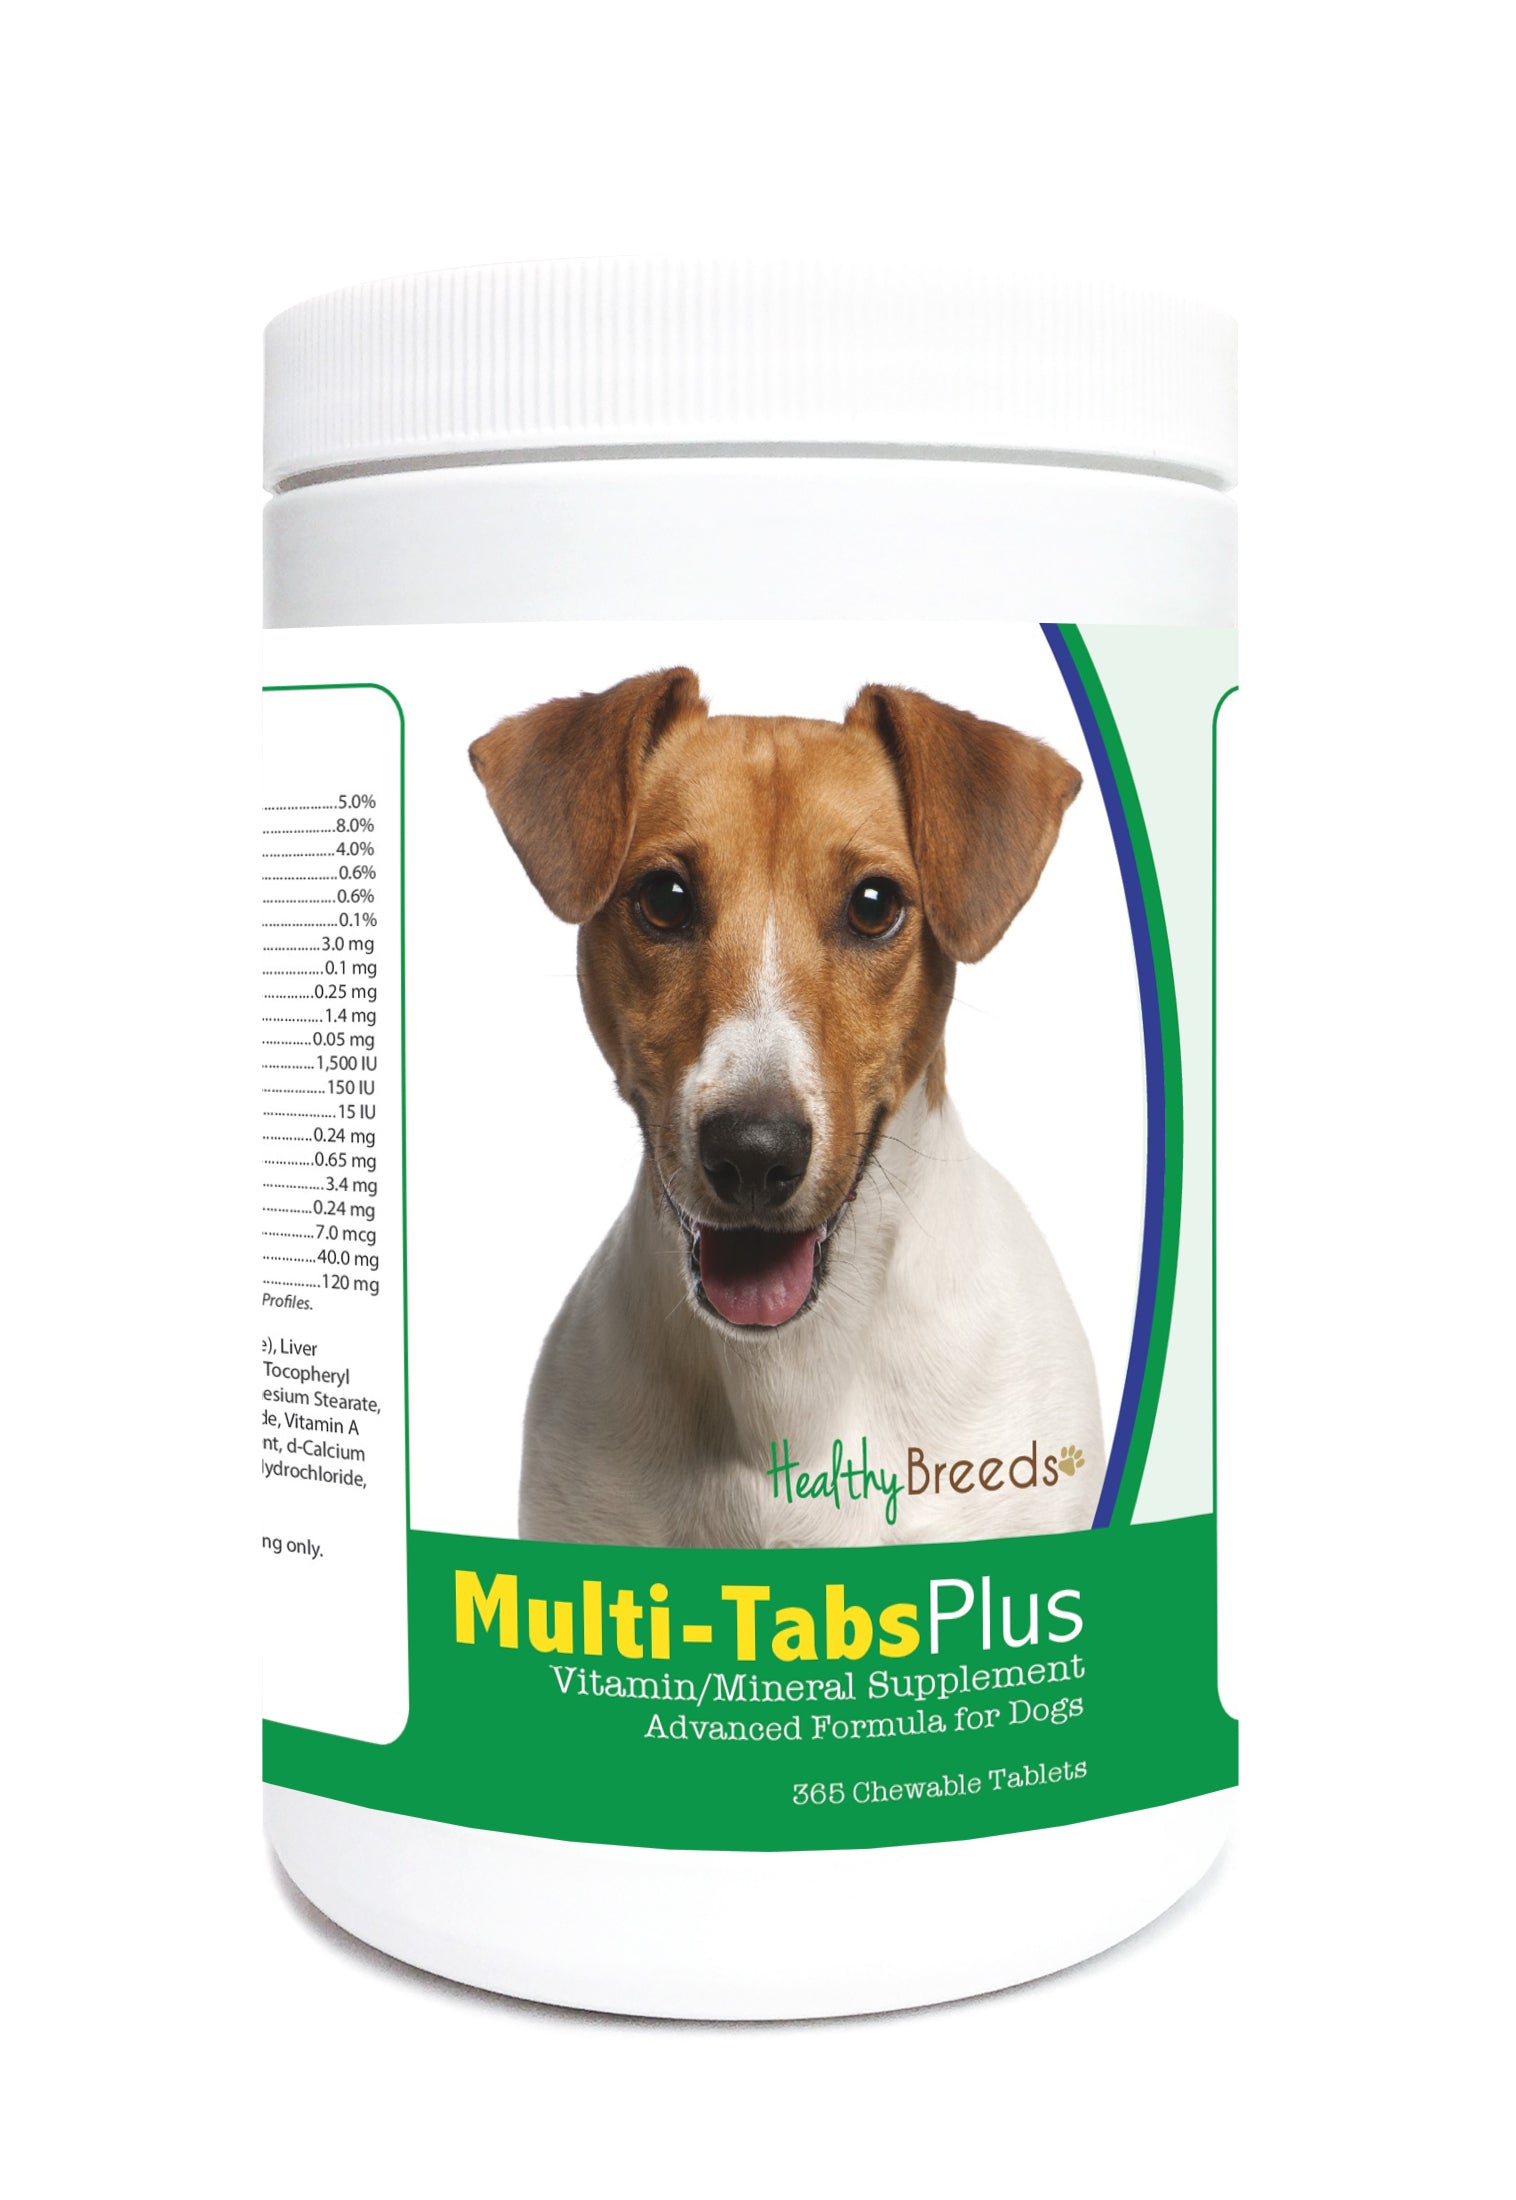 Jack Russell Terrier Multi-Tabs Plus Chewable Tablets 365 Count